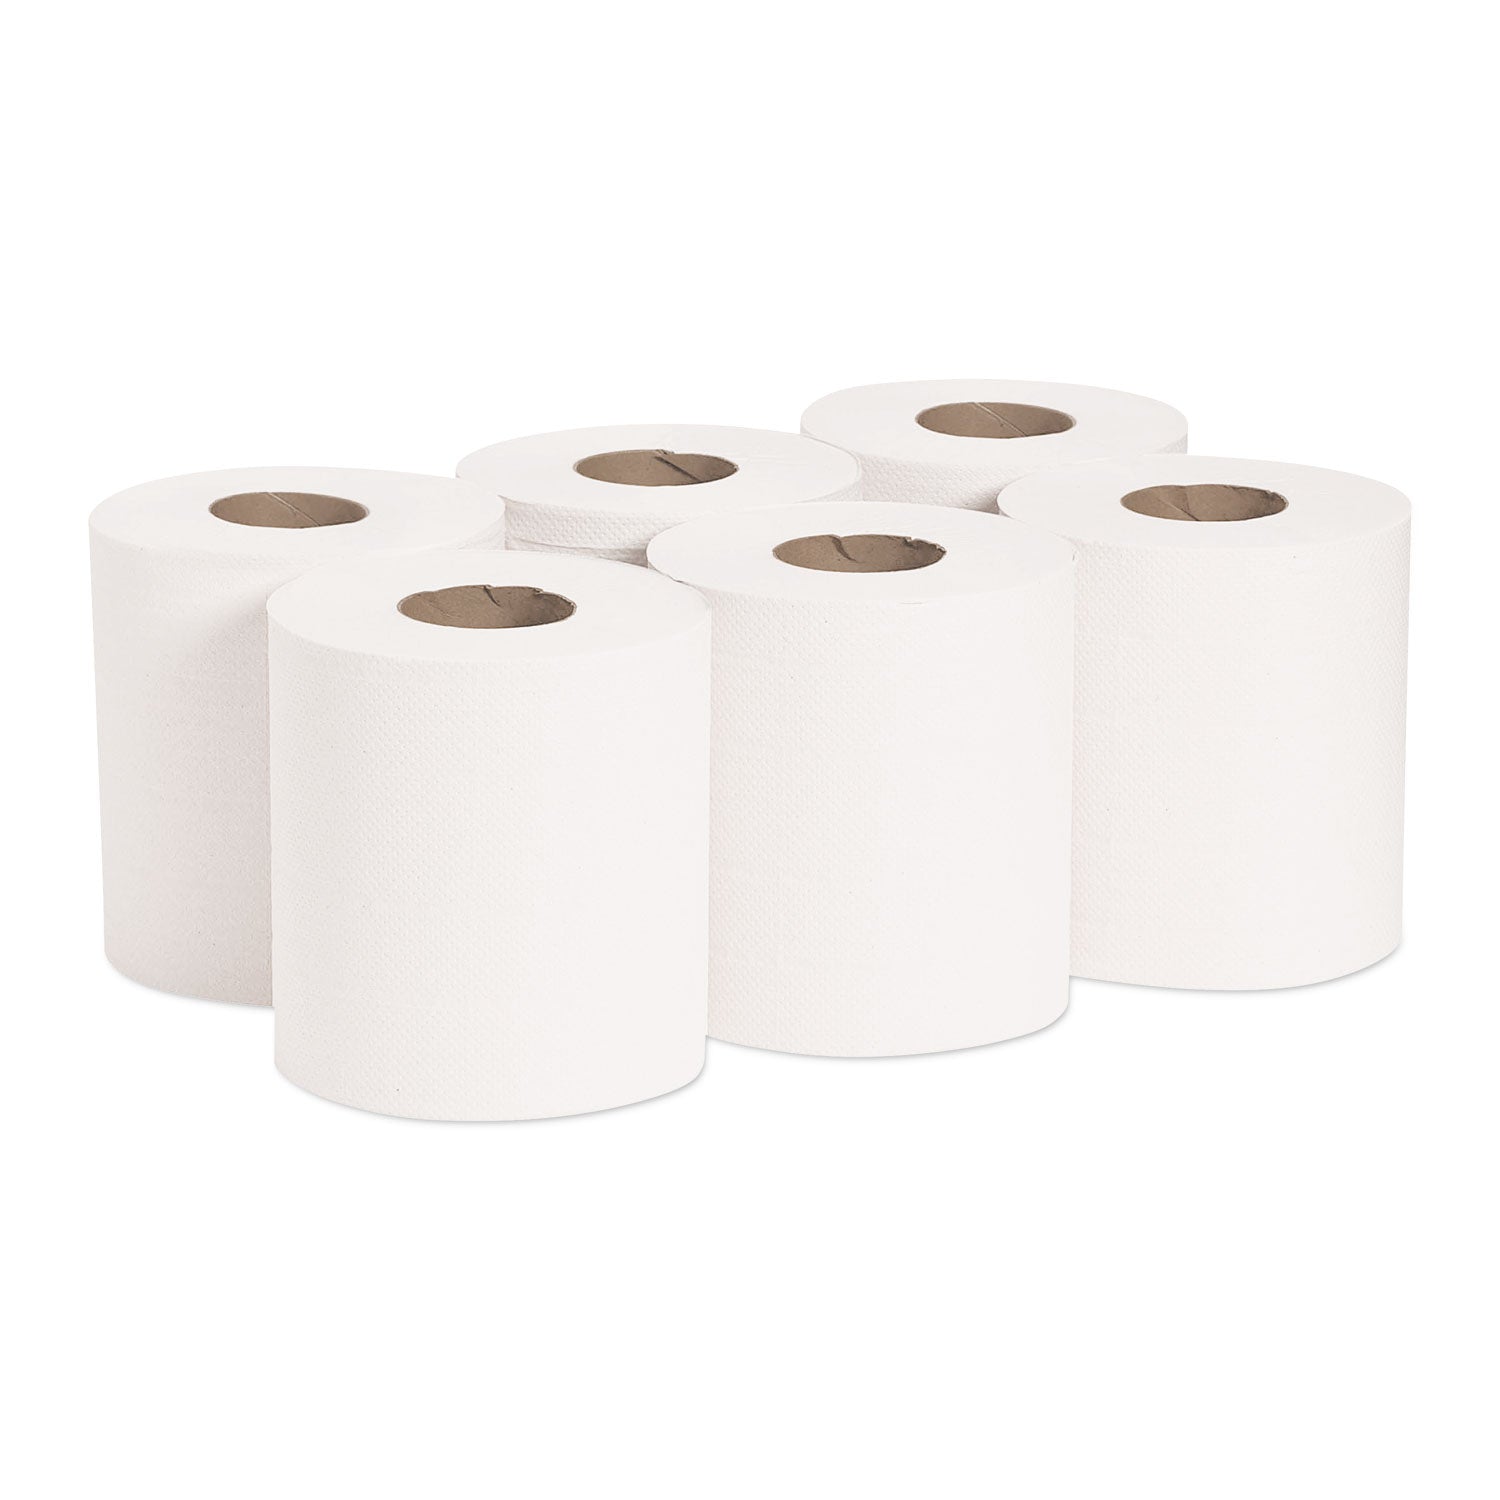 Pacific Blue Select 2-Ply Center-Pull Perf Wipers, 2-Ply, 8.25 x 12, White, 520/Roll, 6 Rolls/Carton - 